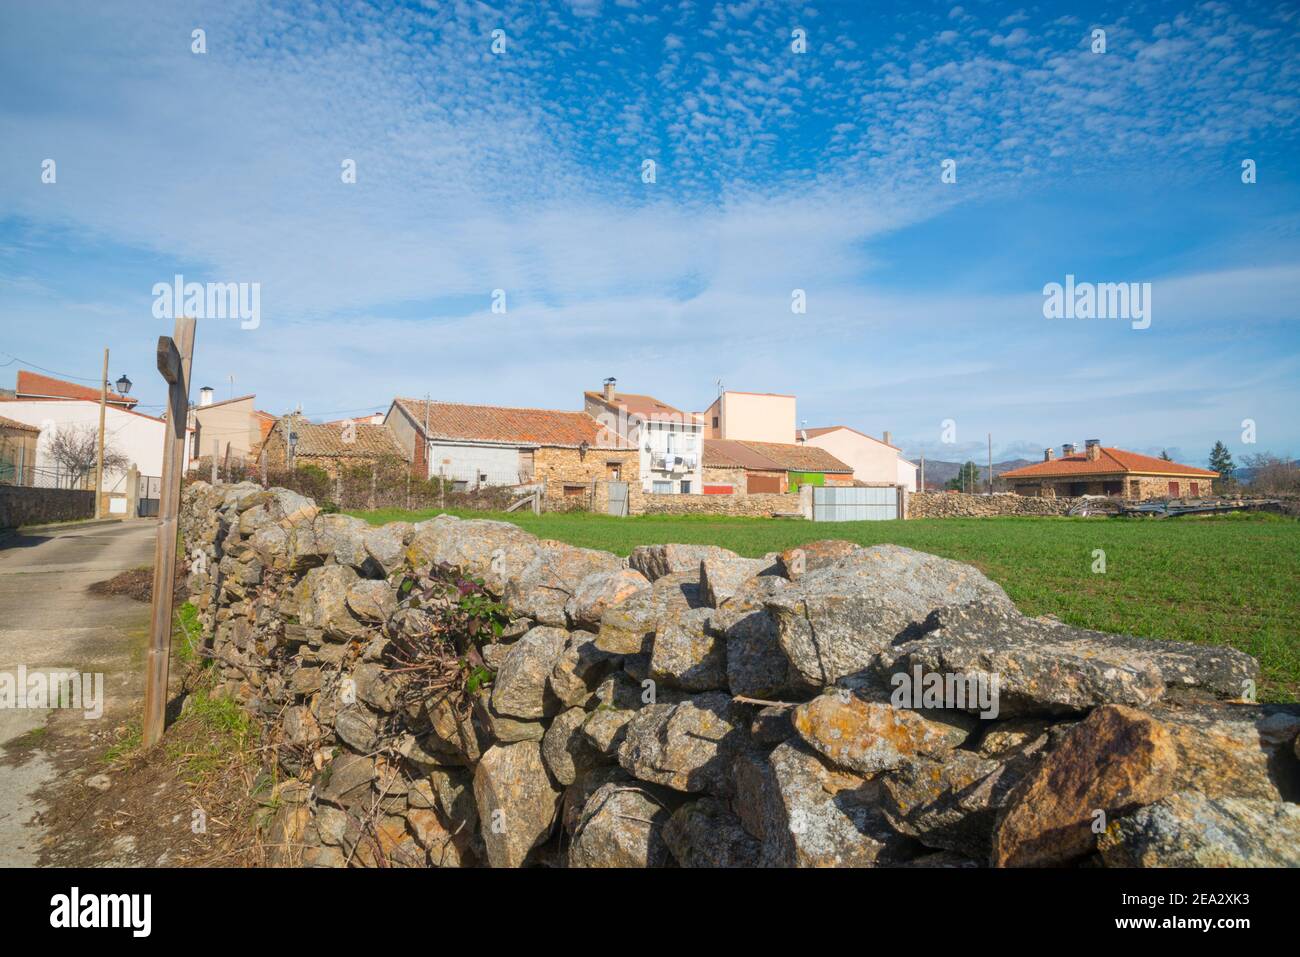 Overview. Gandullas, Madrid province, Spain. Stock Photo